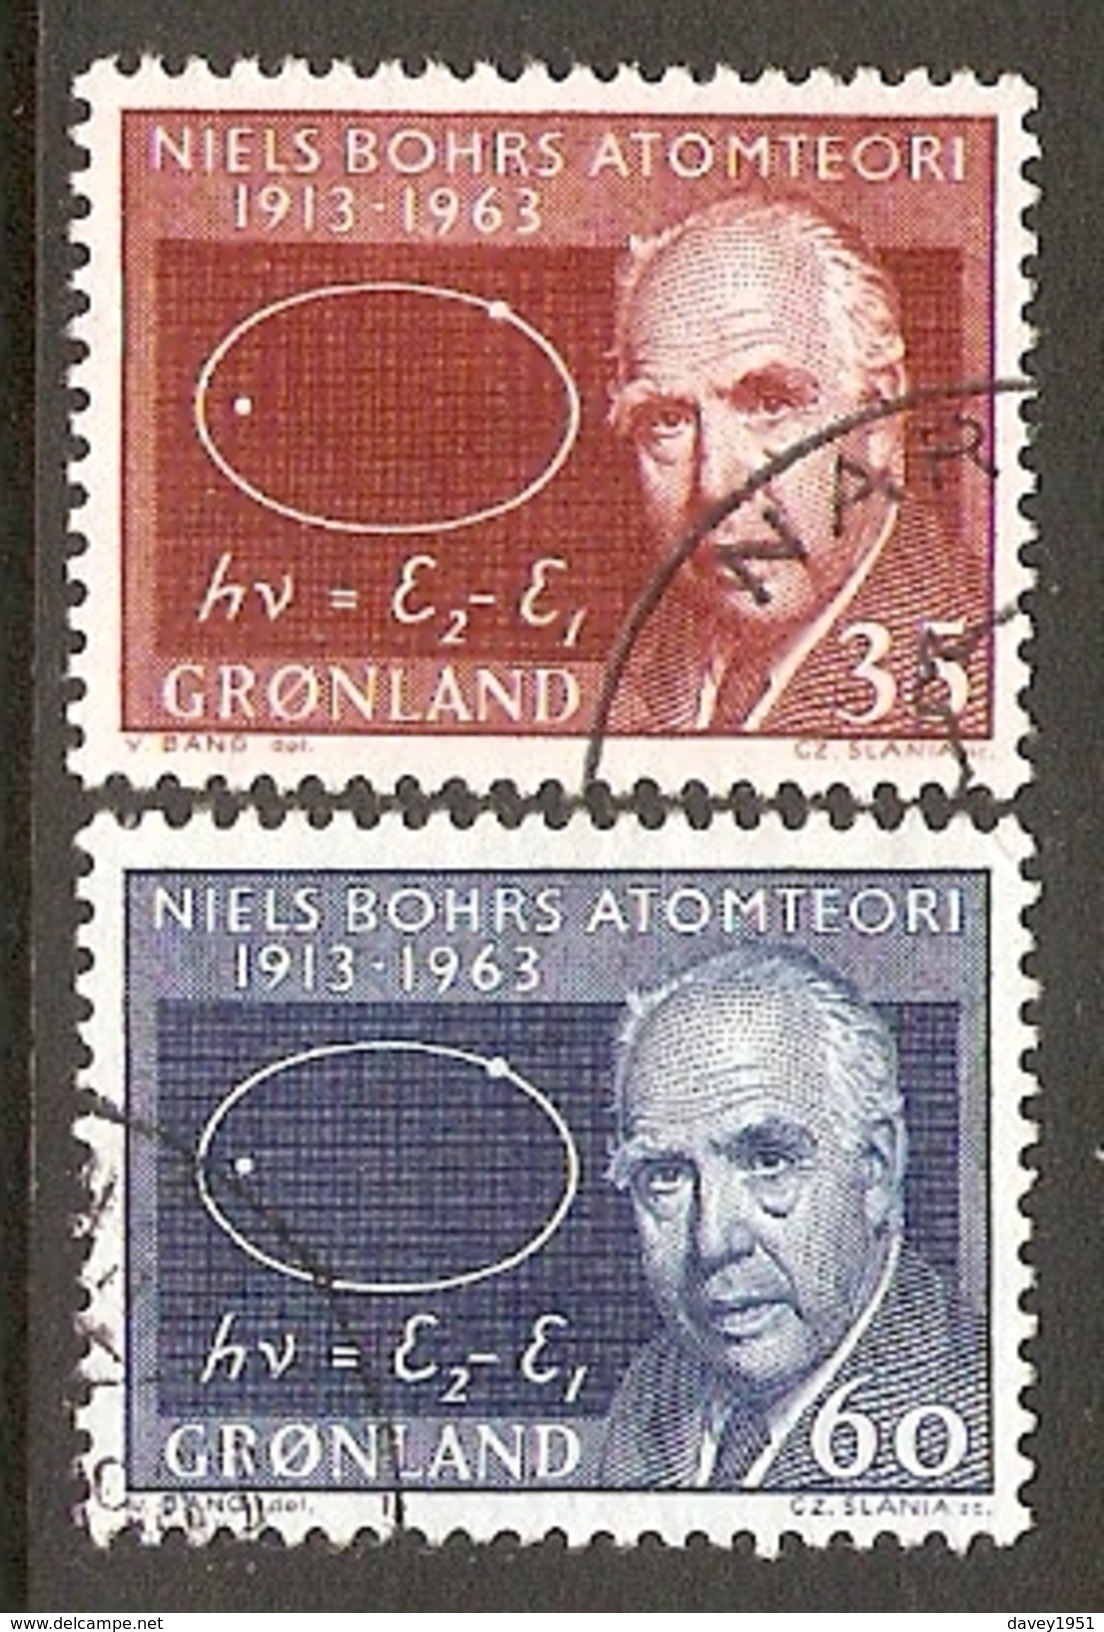 004084 Greenland 1963 Bohr Set FU - Used Stamps